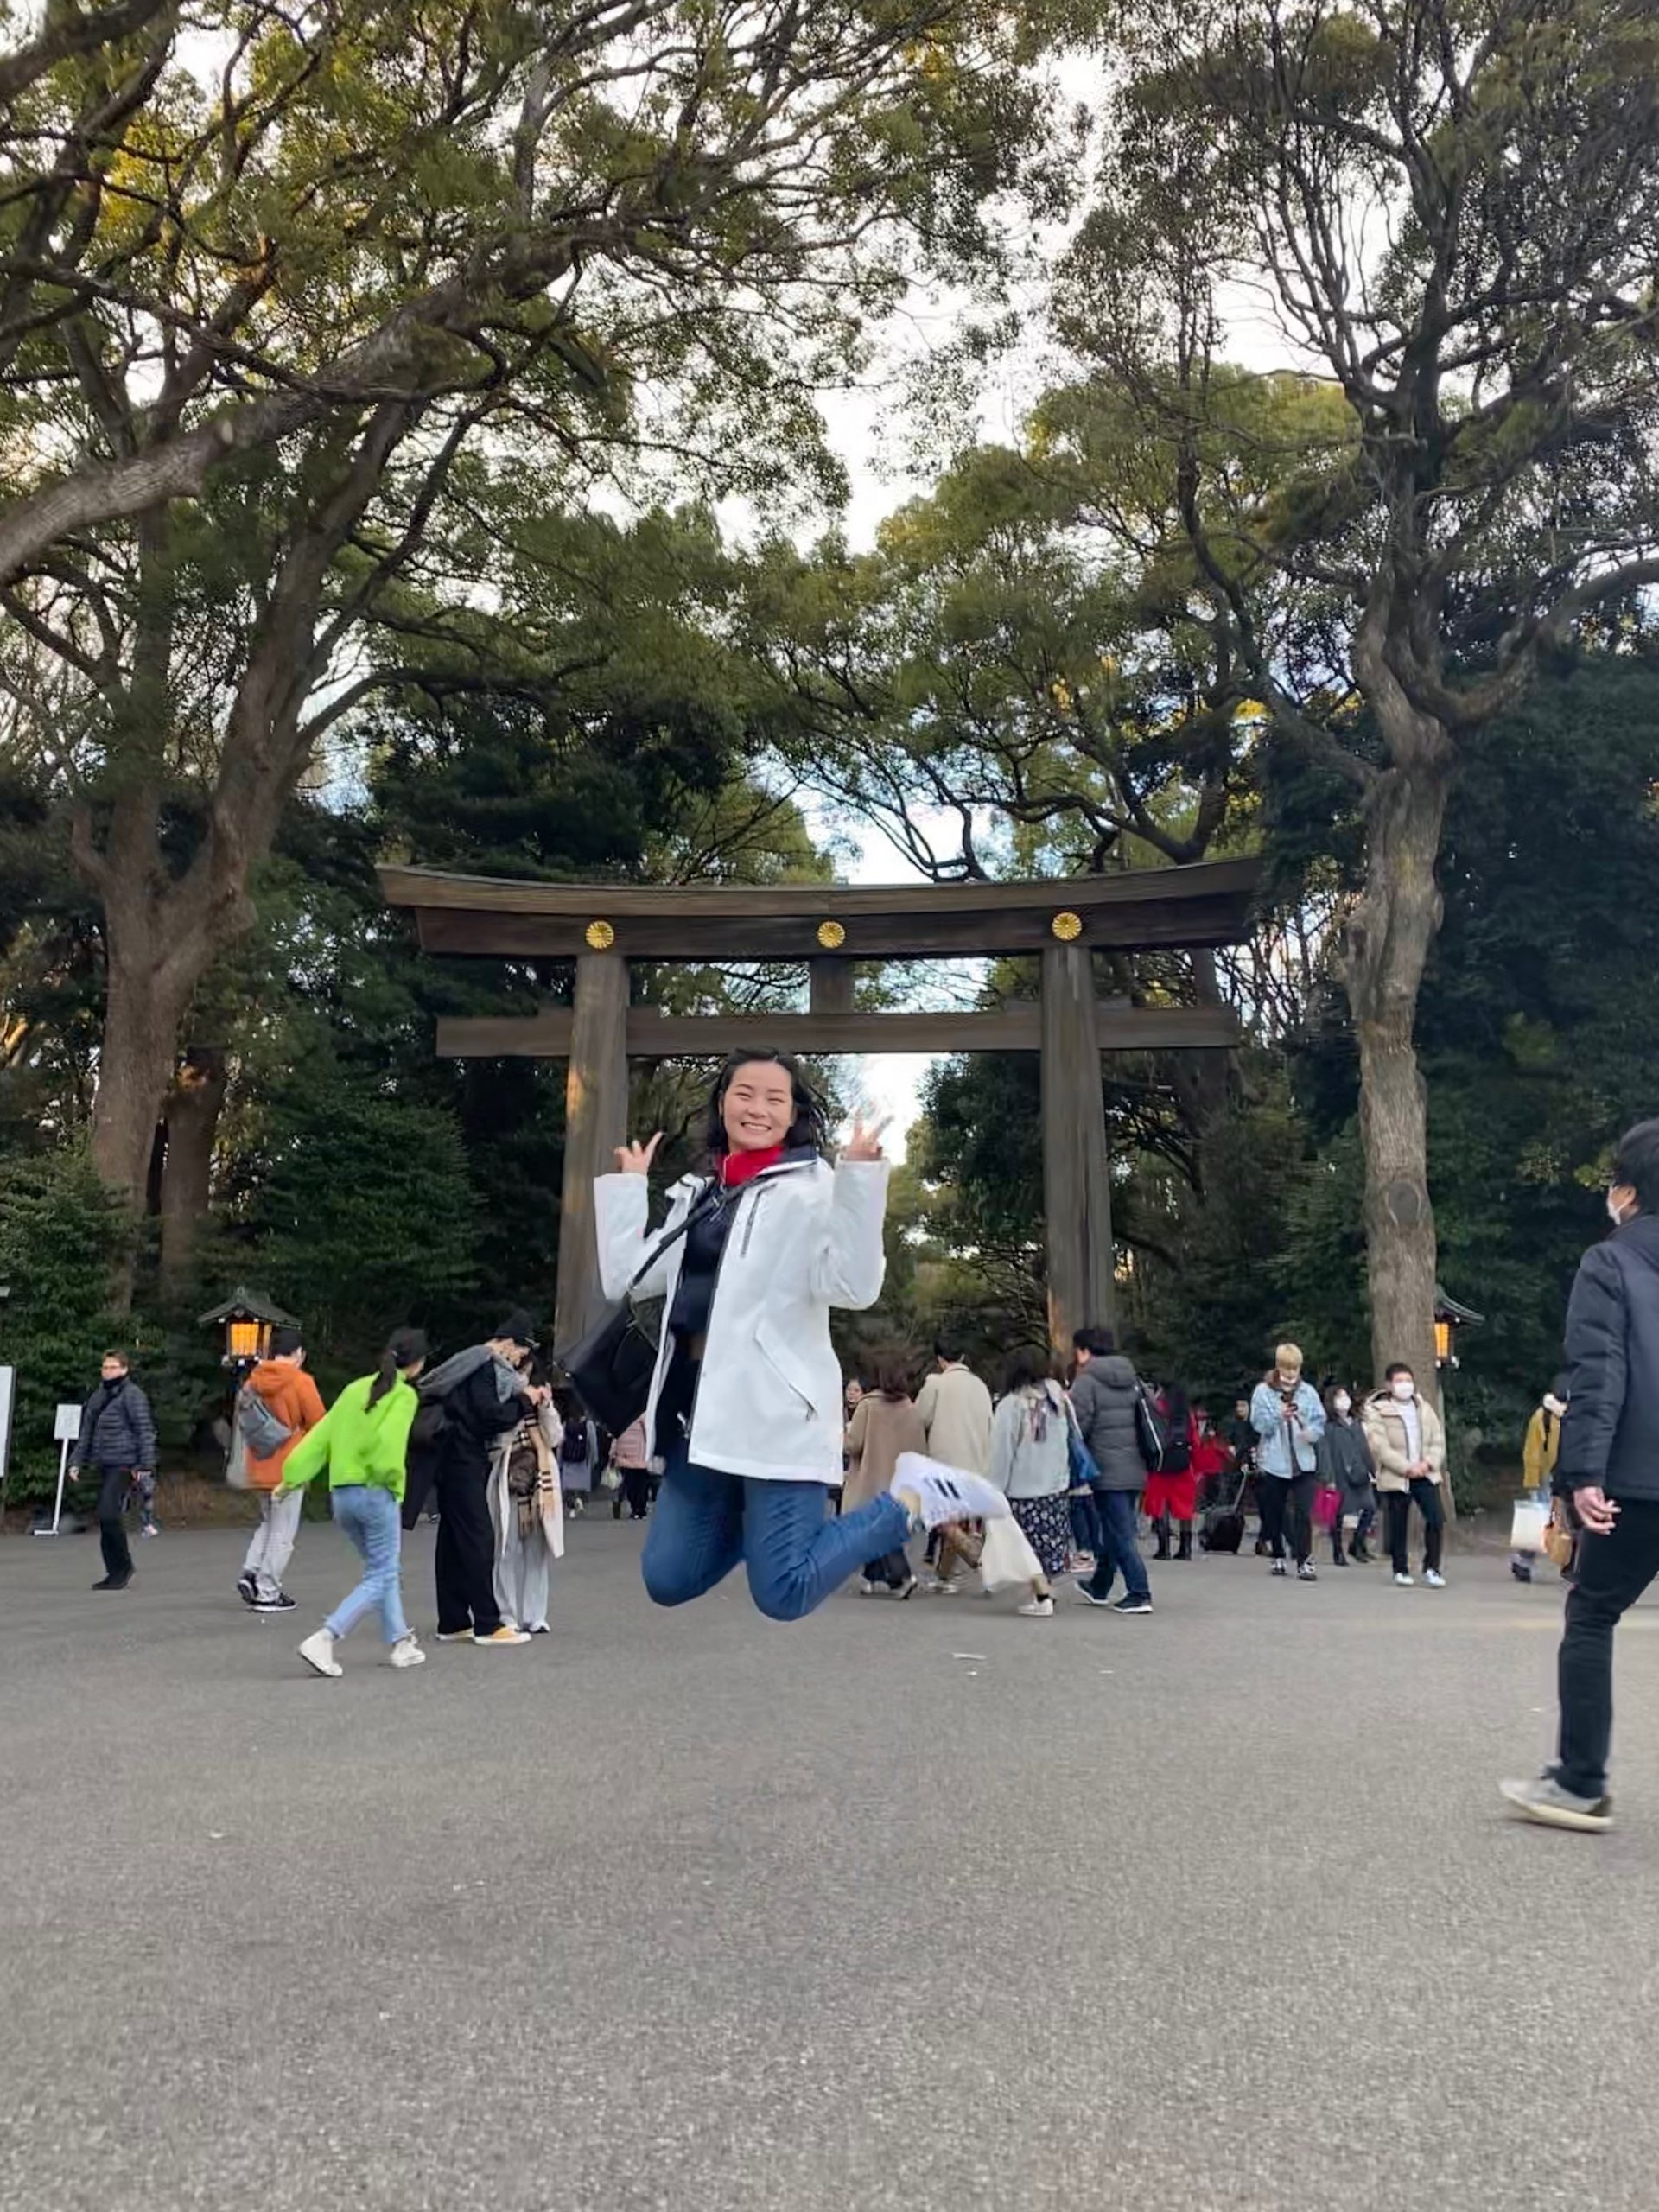 Me jumping and striking a pose in front of a wooden torii gate.